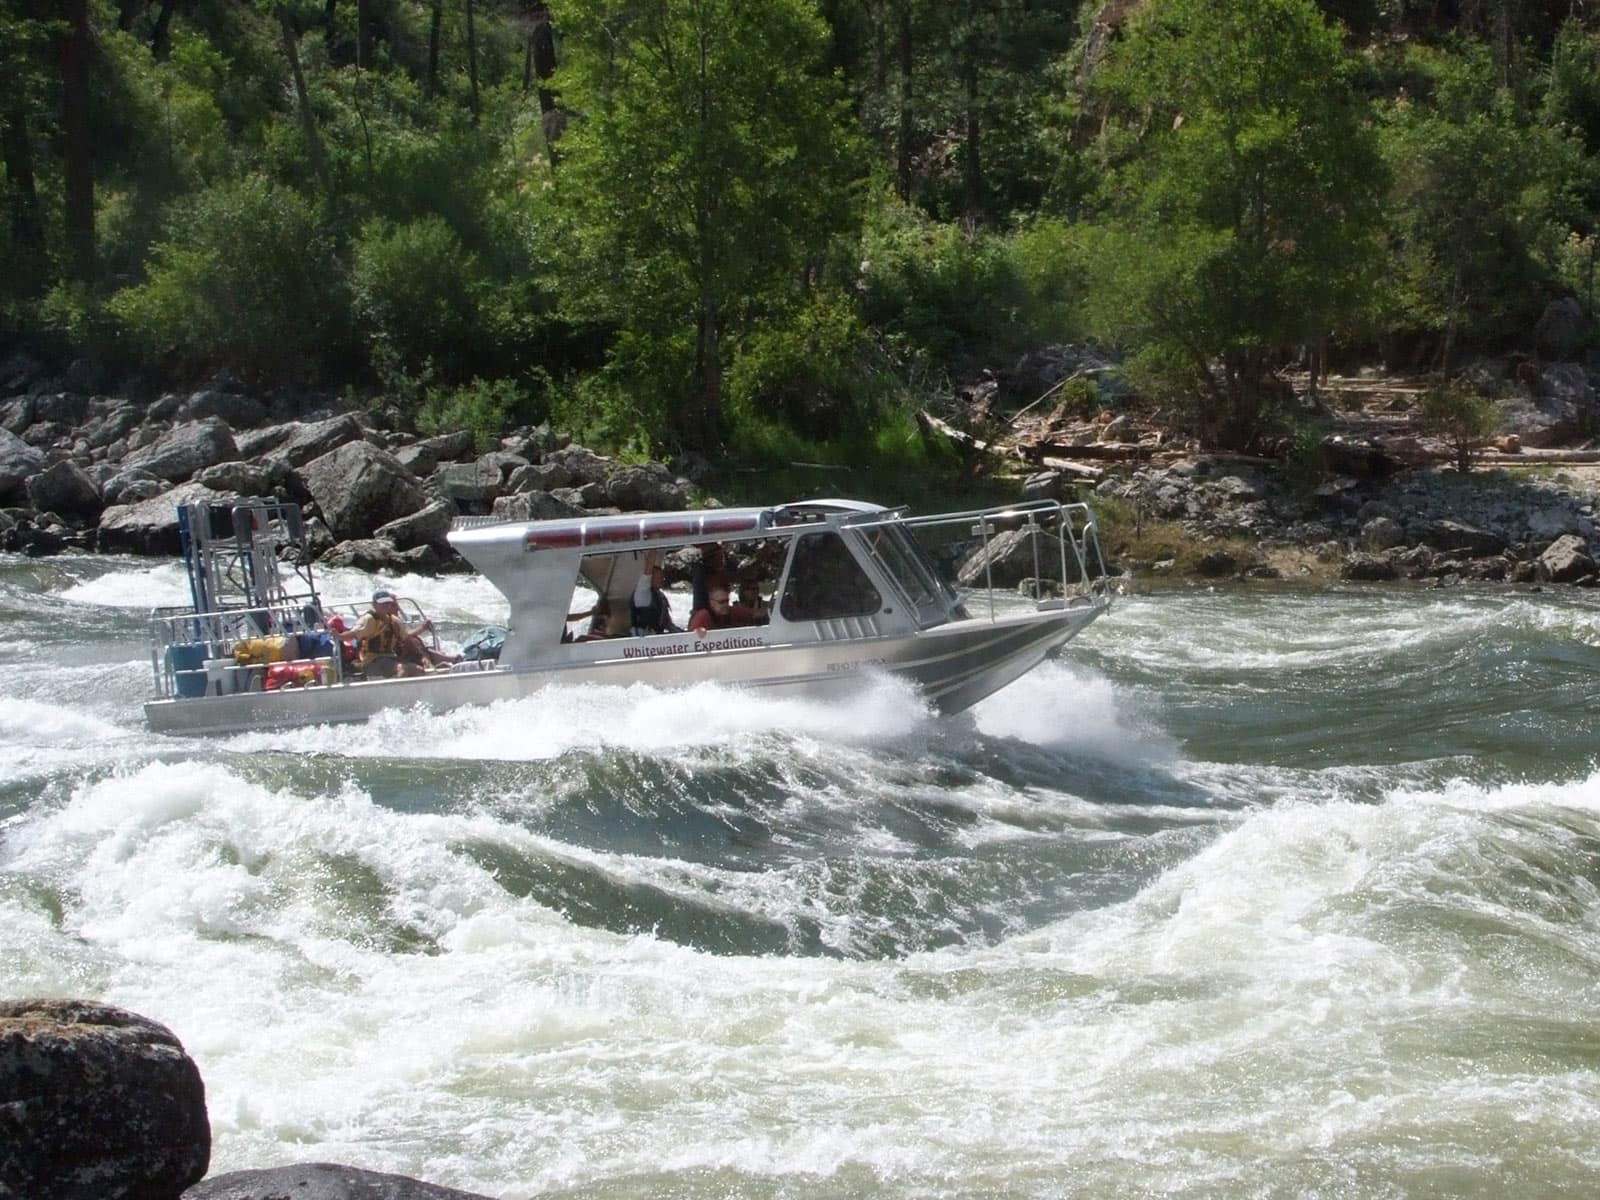 A Whitewater Expeditions jet boat hauls rafting equipment during a Salmon River jet back.